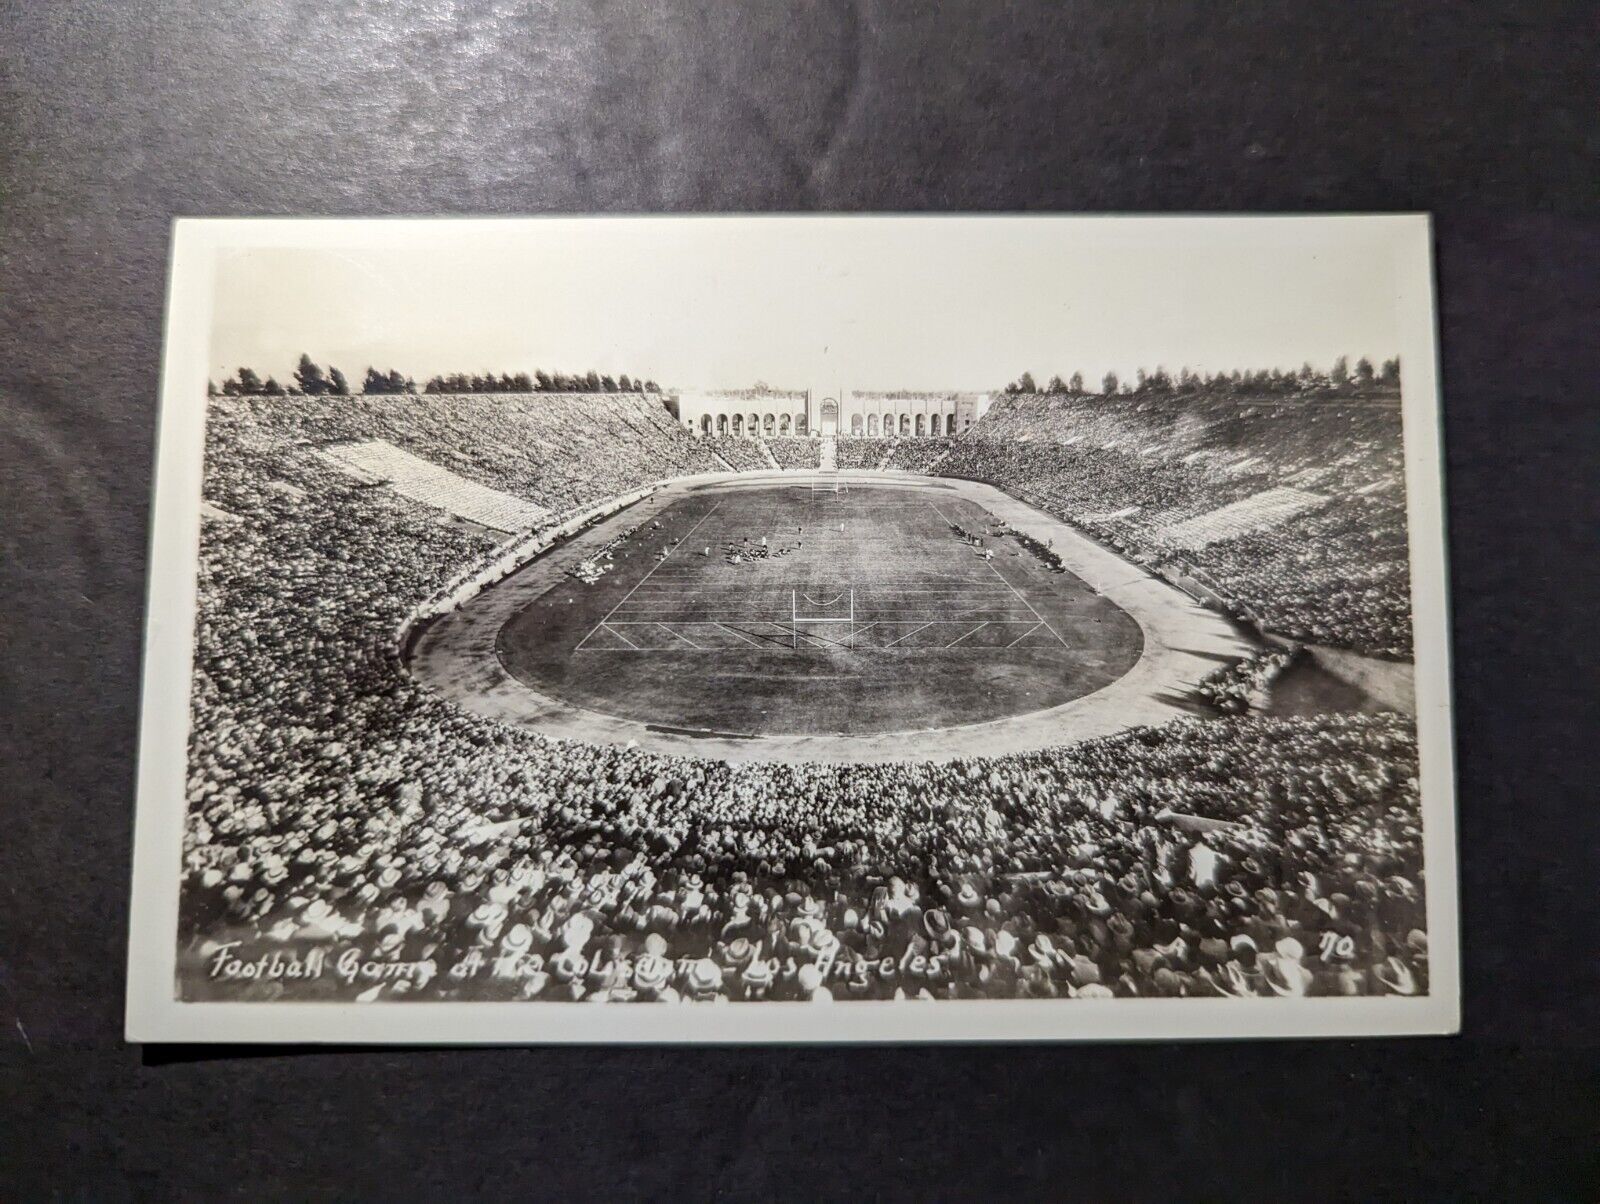 Mint USA Sports RPPC Postcard Football Game at The Coliseum Los Angeles CA